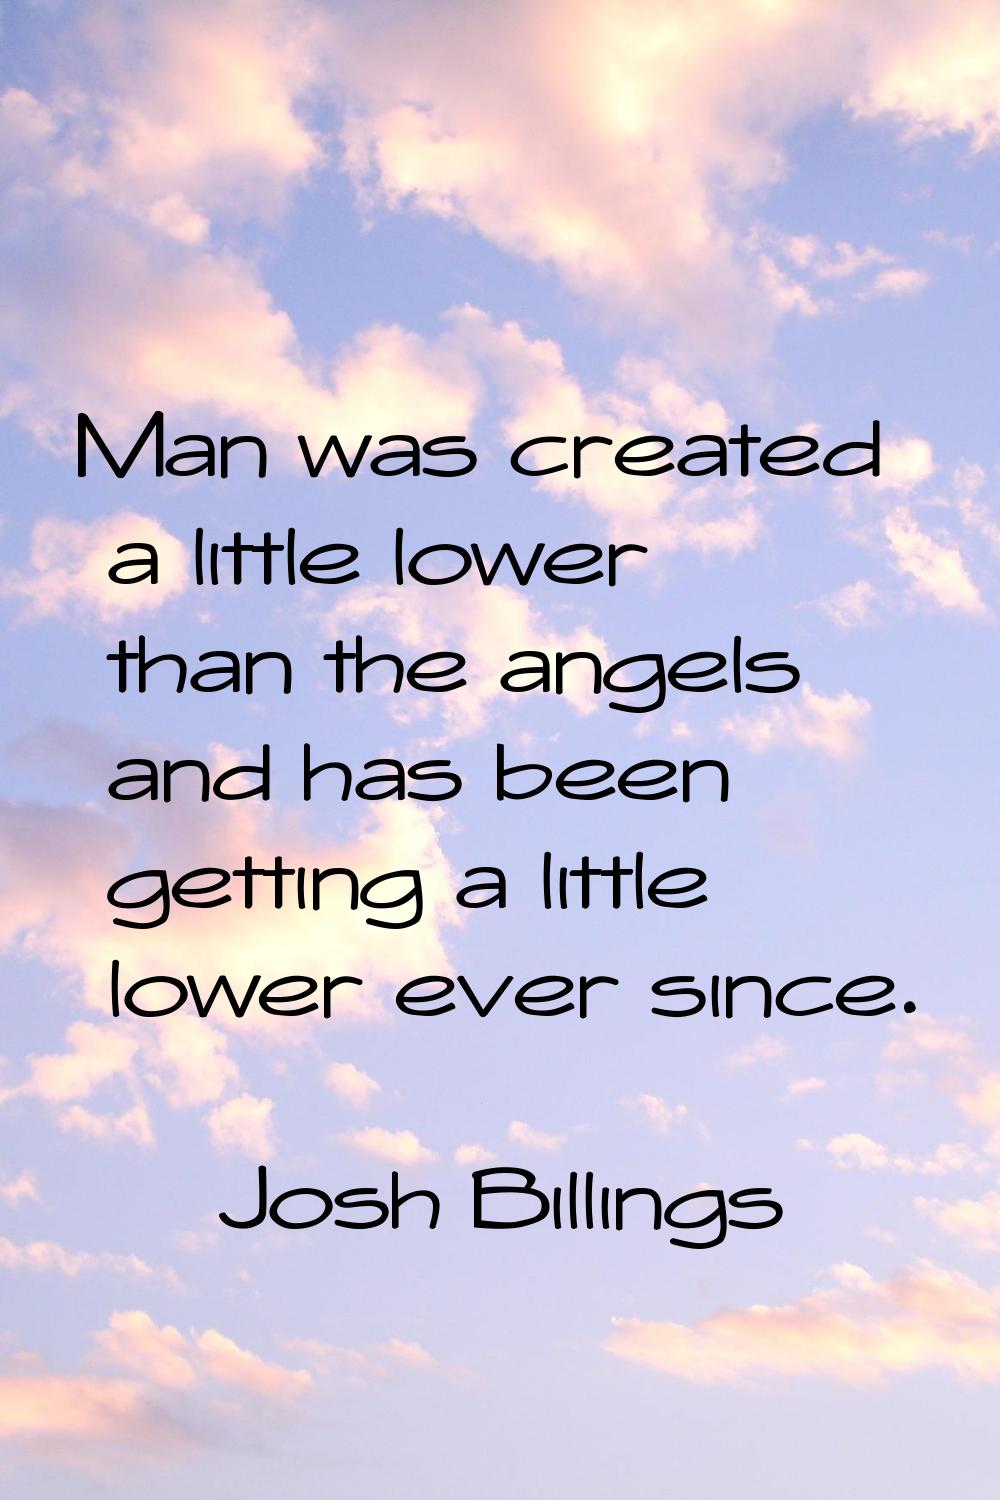 Man was created a little lower than the angels and has been getting a little lower ever since.